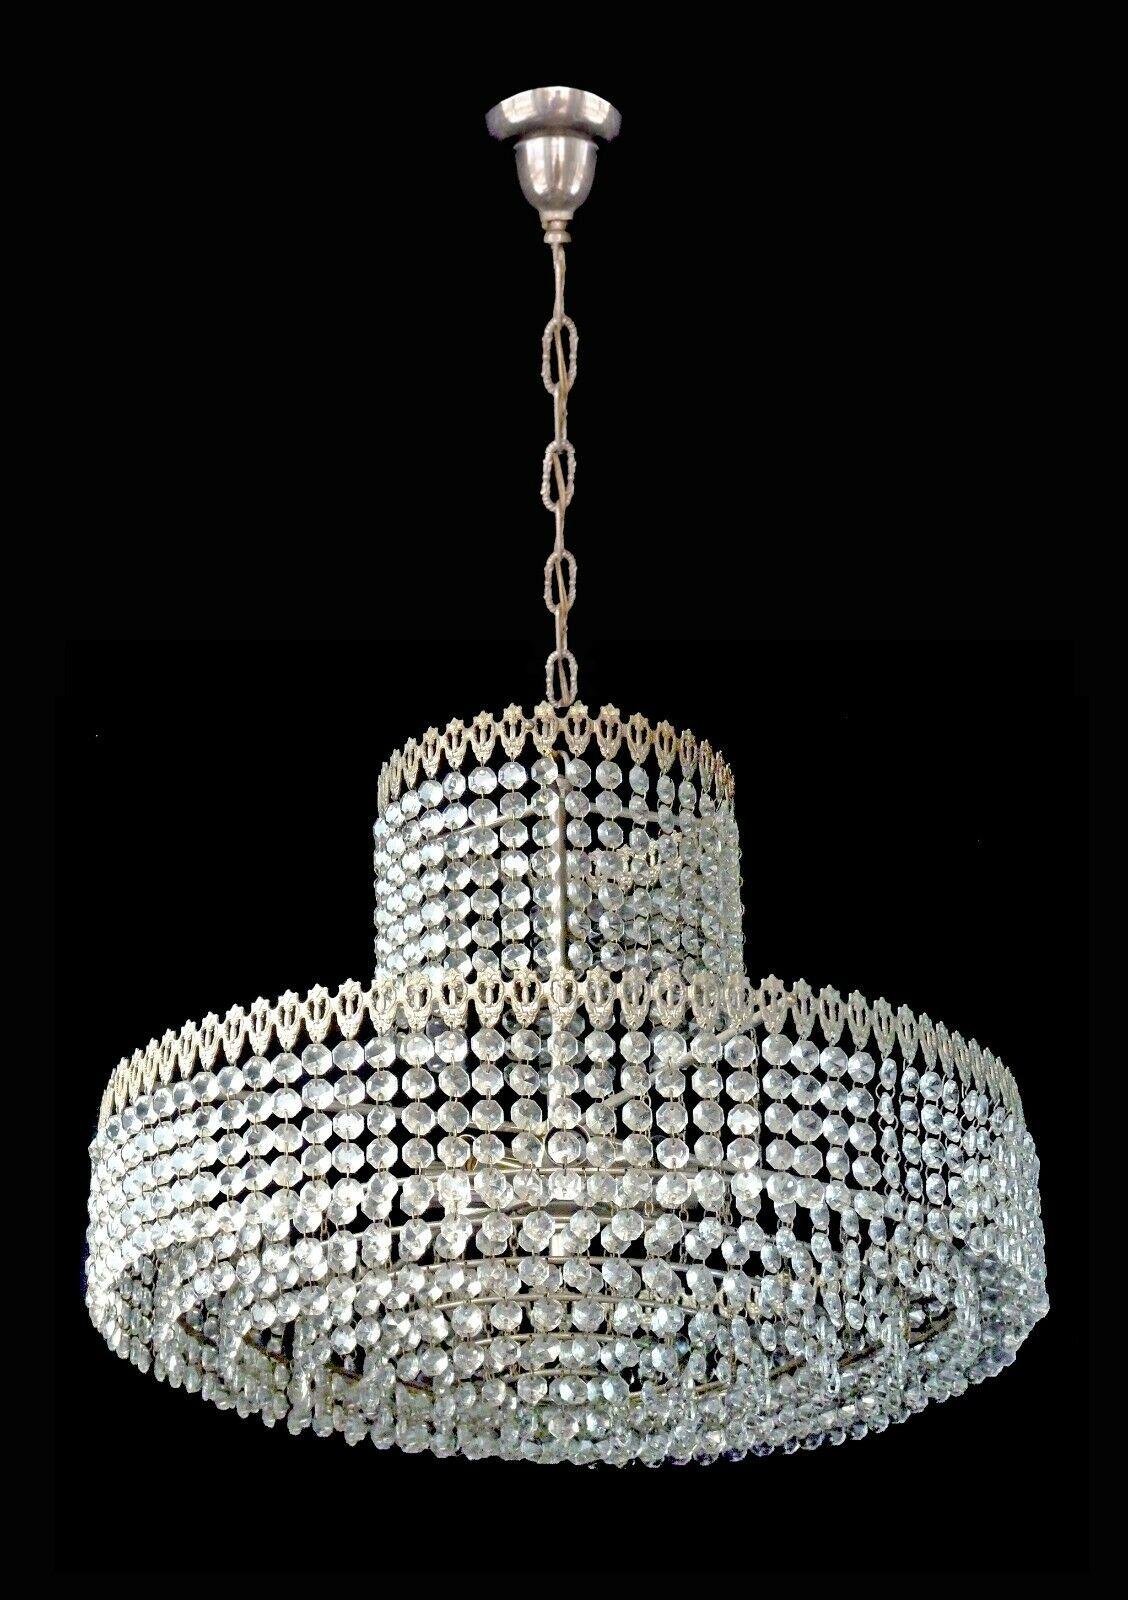 French Hollywood Regency Chrome Cut Crystal Beads 8tiers Wedding Cake Chandelier For Sale 2